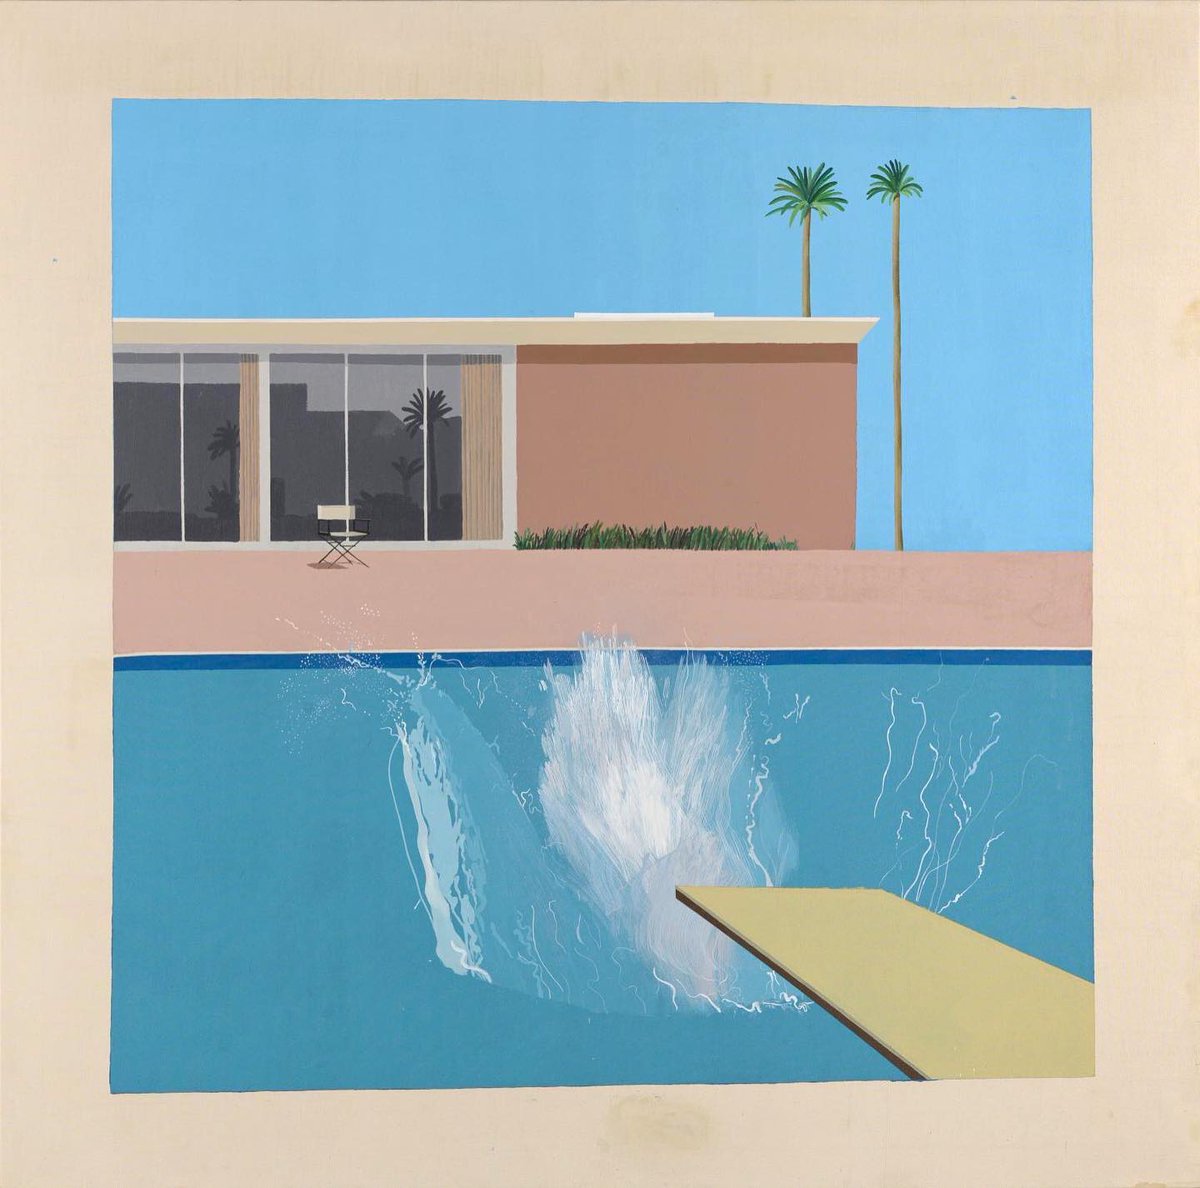 Happy birthday David Hockney! 💙 Summer wouldn't be the same without 'A Bigger Splash' at Tate Britain.

Hockney's painting is on free display inside 'In Full Colour: 1960-70'. Dive in this summer. ☀️ bit.ly/3pu0lRs

💦 #DavidHockney A Bigger Splash 1967 © David Hockney